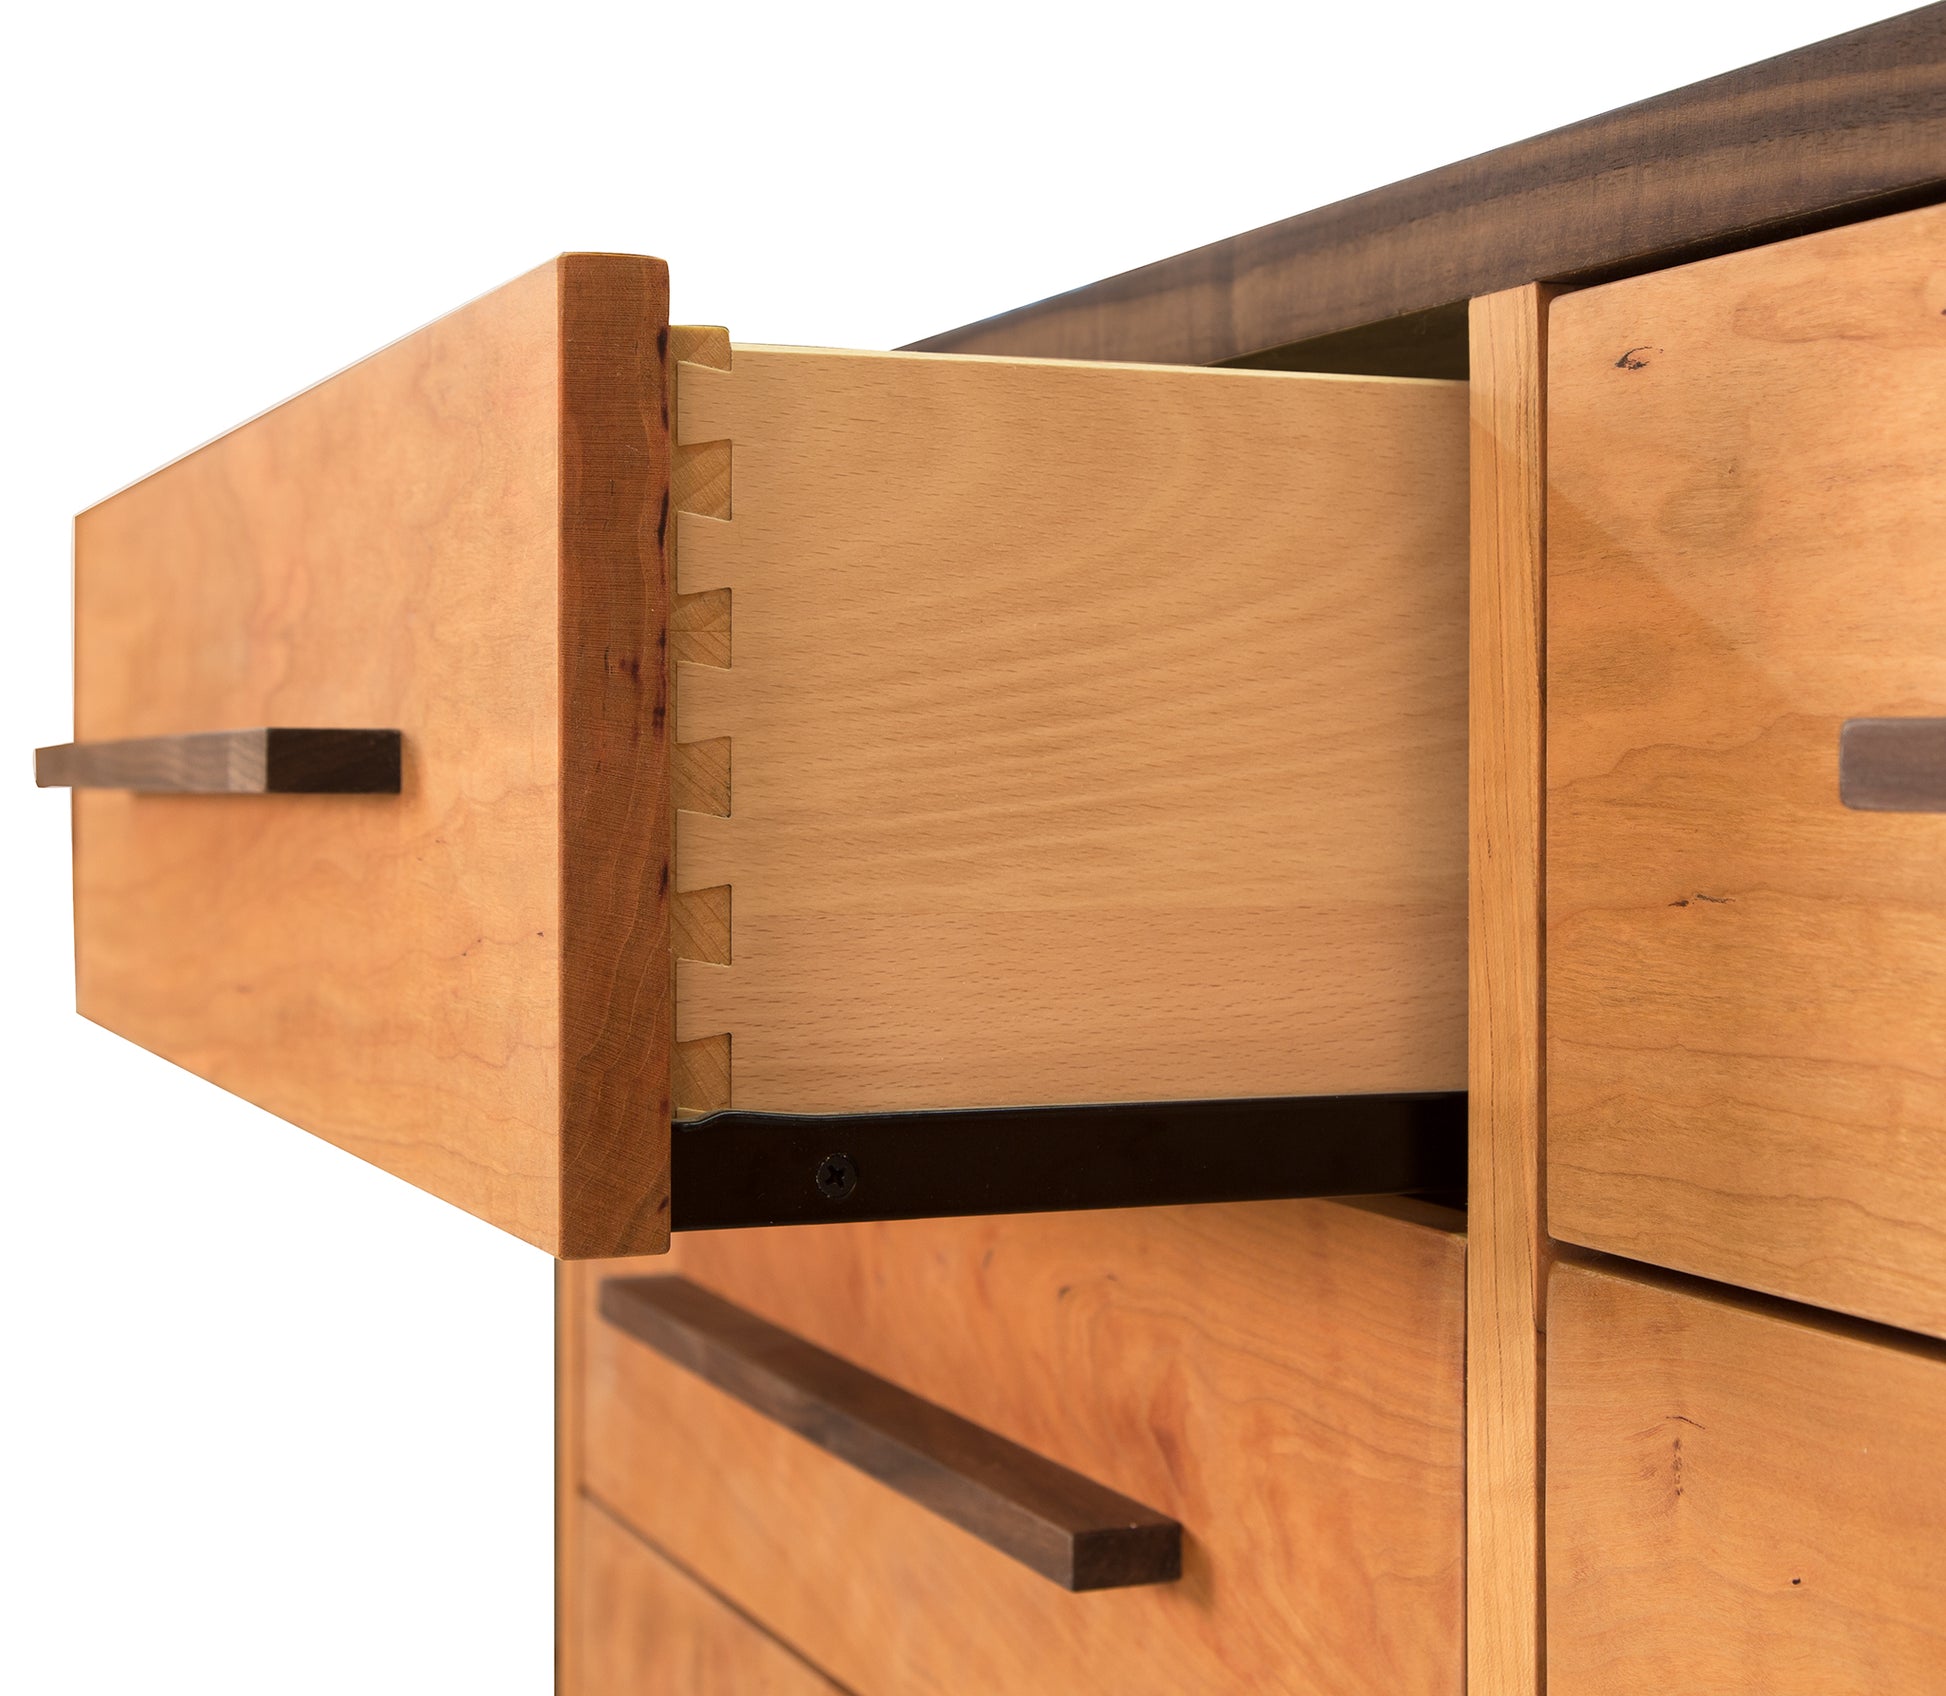 Close-up view of an open drawer in a Vermont Furniture Designs Modern American 8-Drawer Dresser #1, showcasing precise dovetail joints and smooth finish. The surrounding drawers are closed, featuring sleek, rectangular handles.